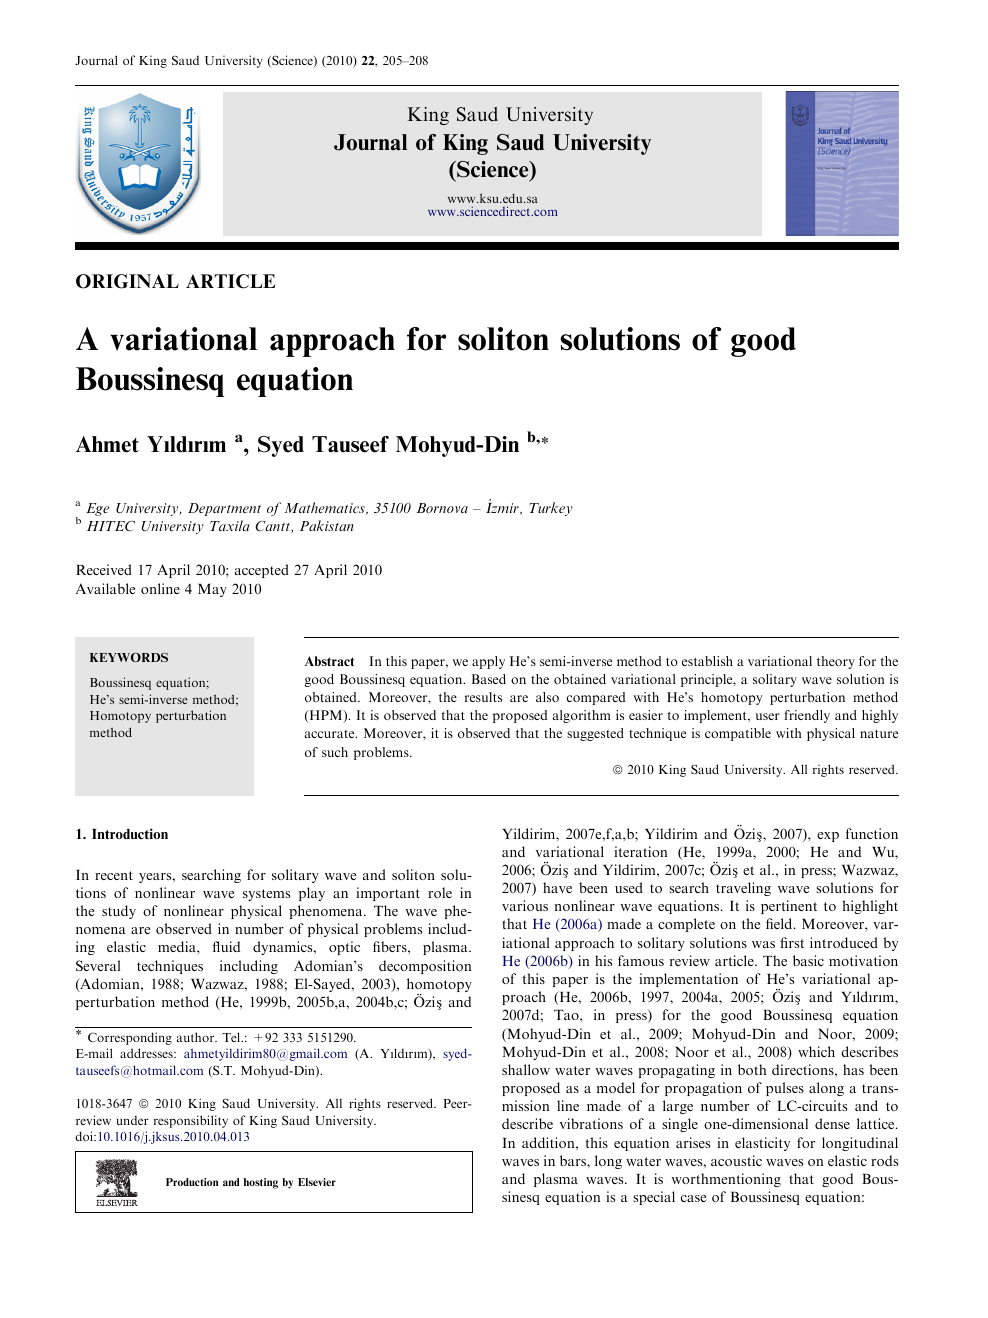 A variational approach for soliton solutions of good Boussinesq ...